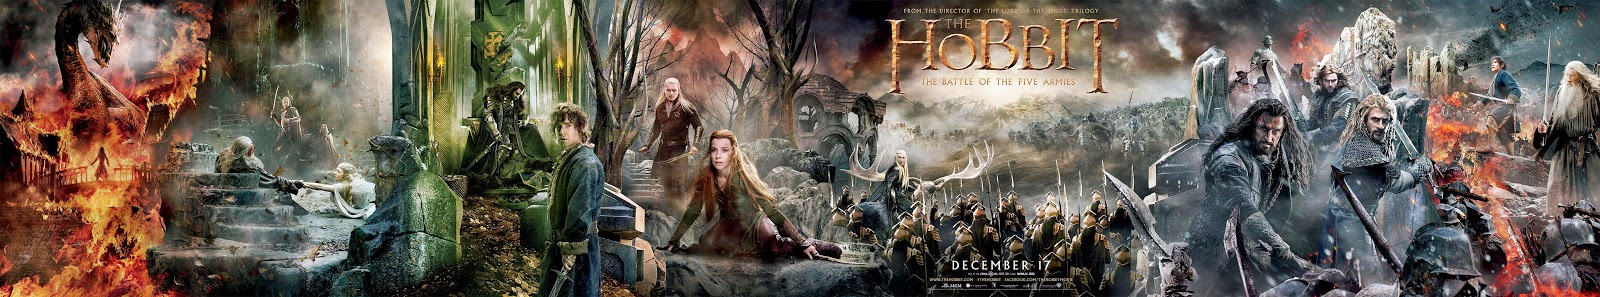 The Middle-Earth Blog: The Hobbit: The Battle of the Five Armies Scroll